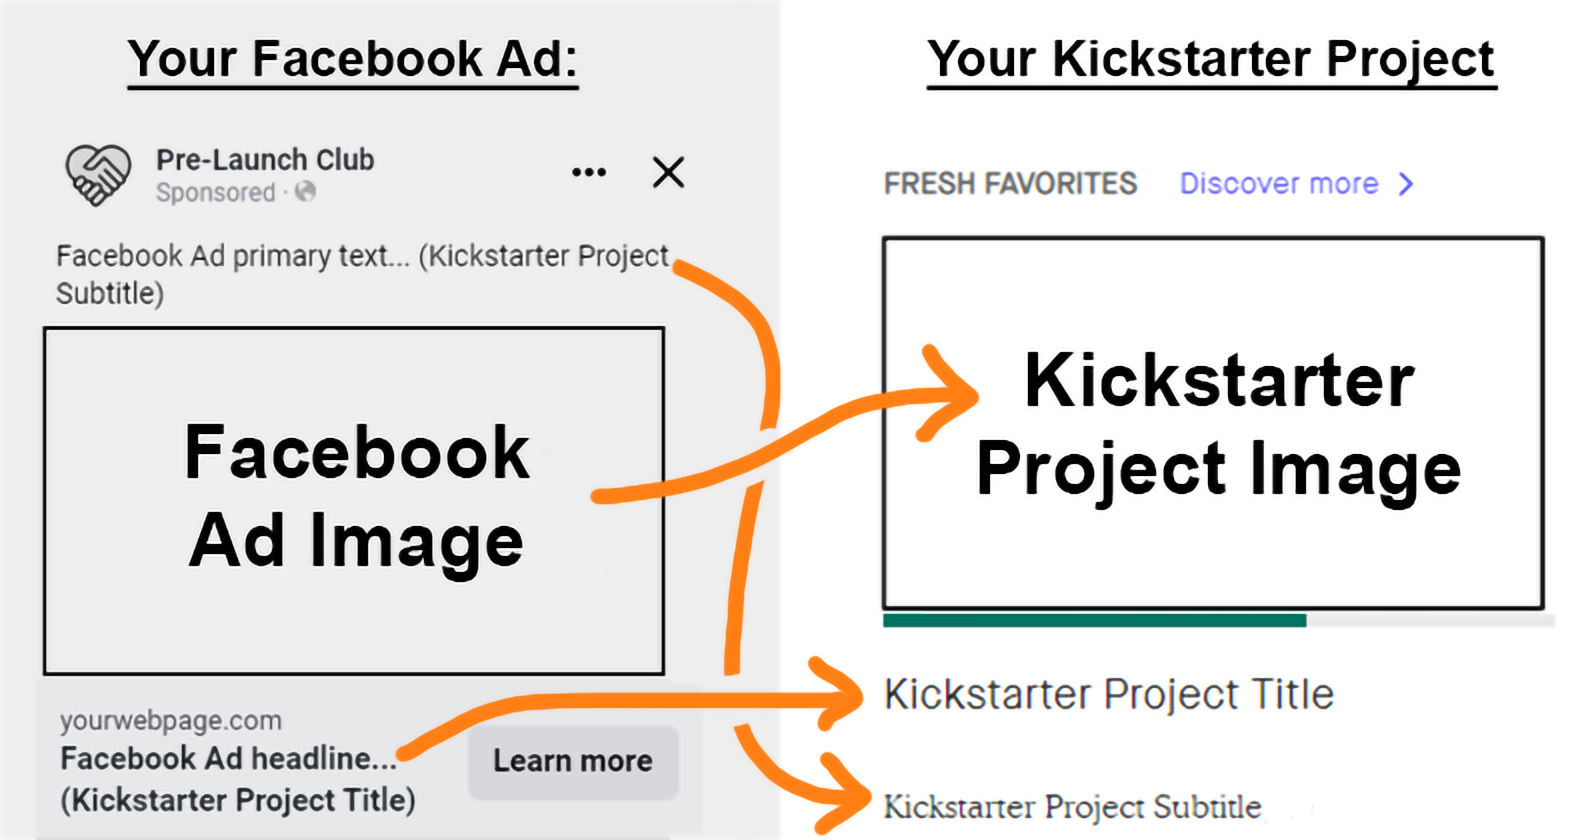 Transferring winning ad content to the Kickstarter campaign page